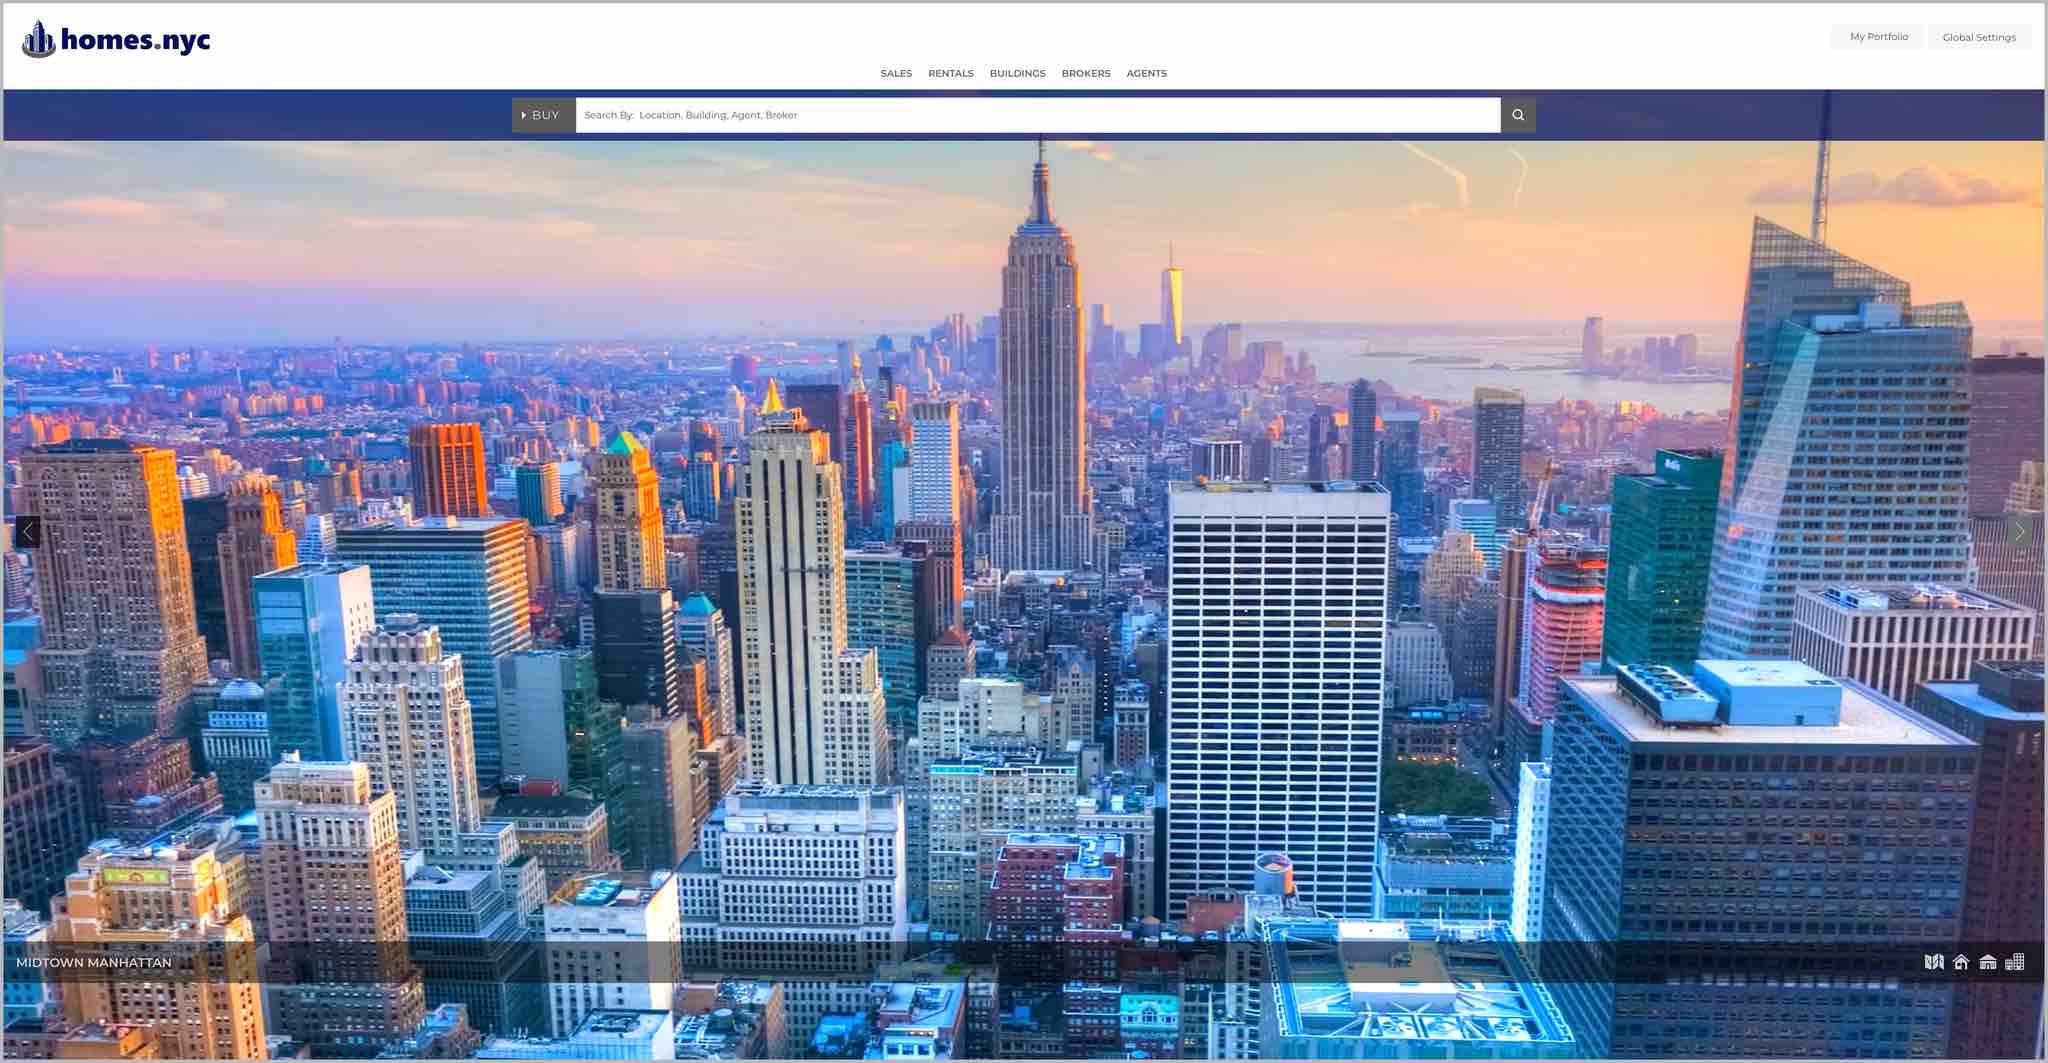 HomesNYC new home search website